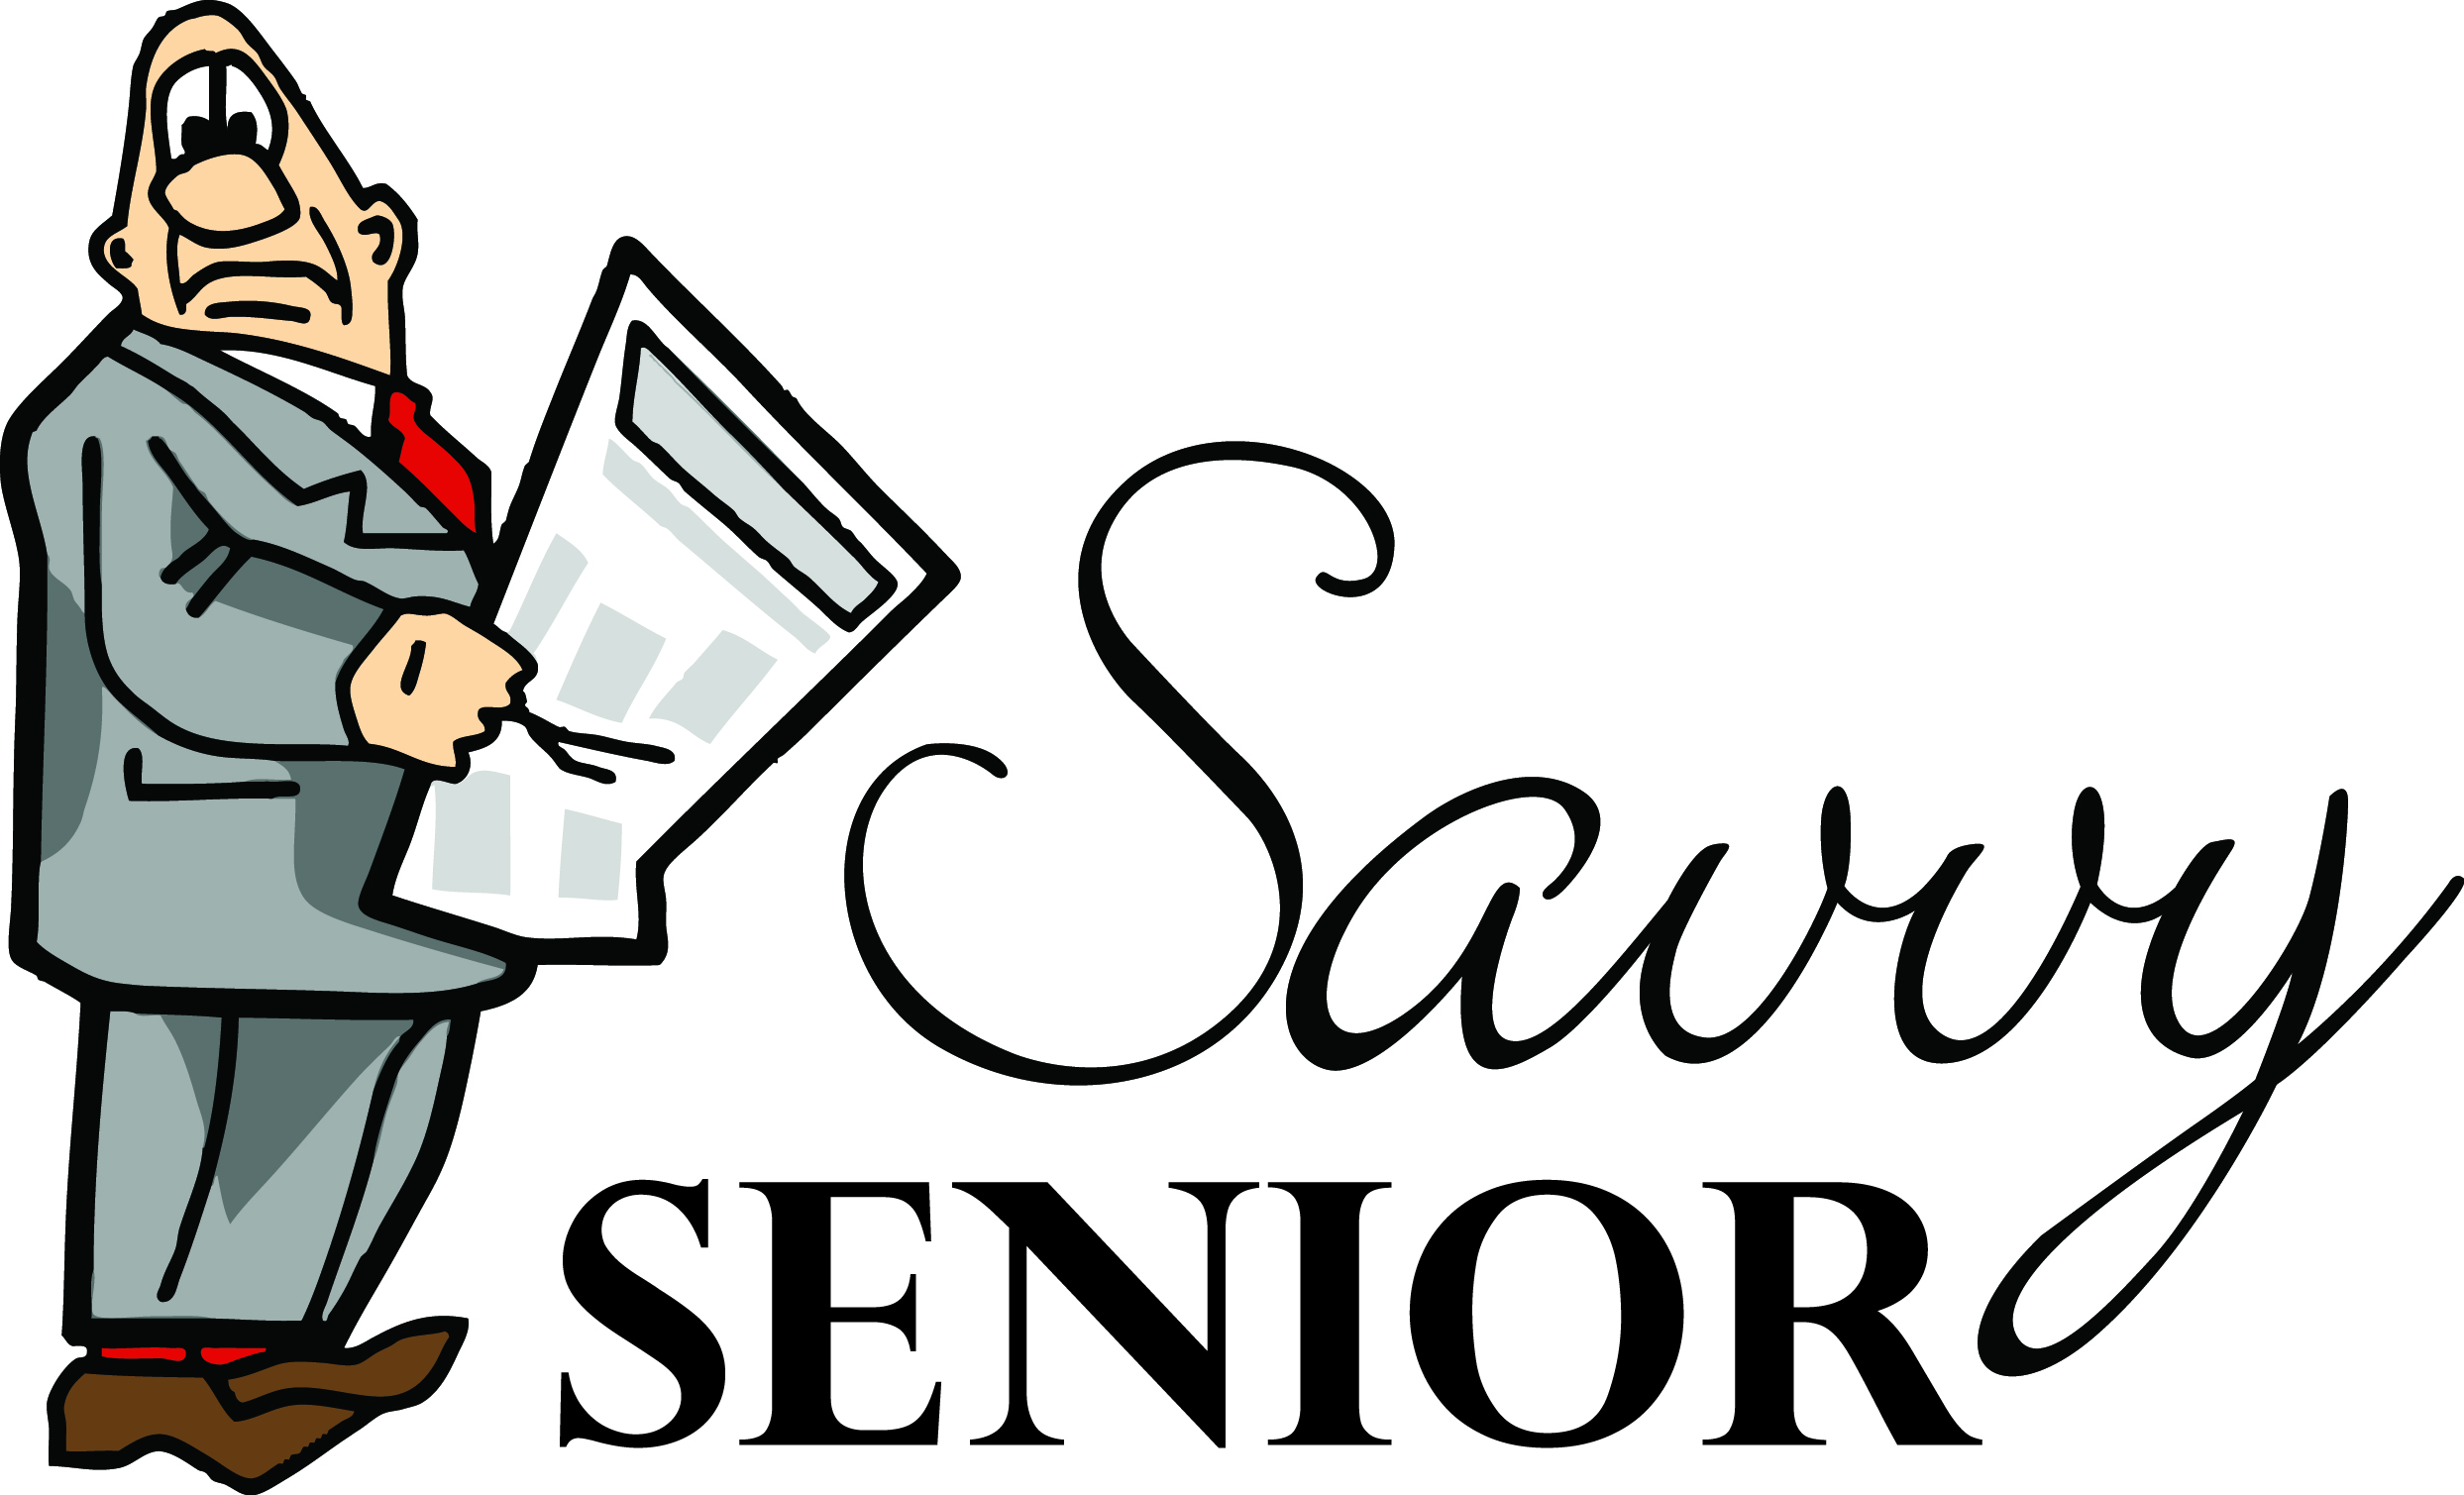 Savvy Senior: How to Choose an Assisted Living Facility